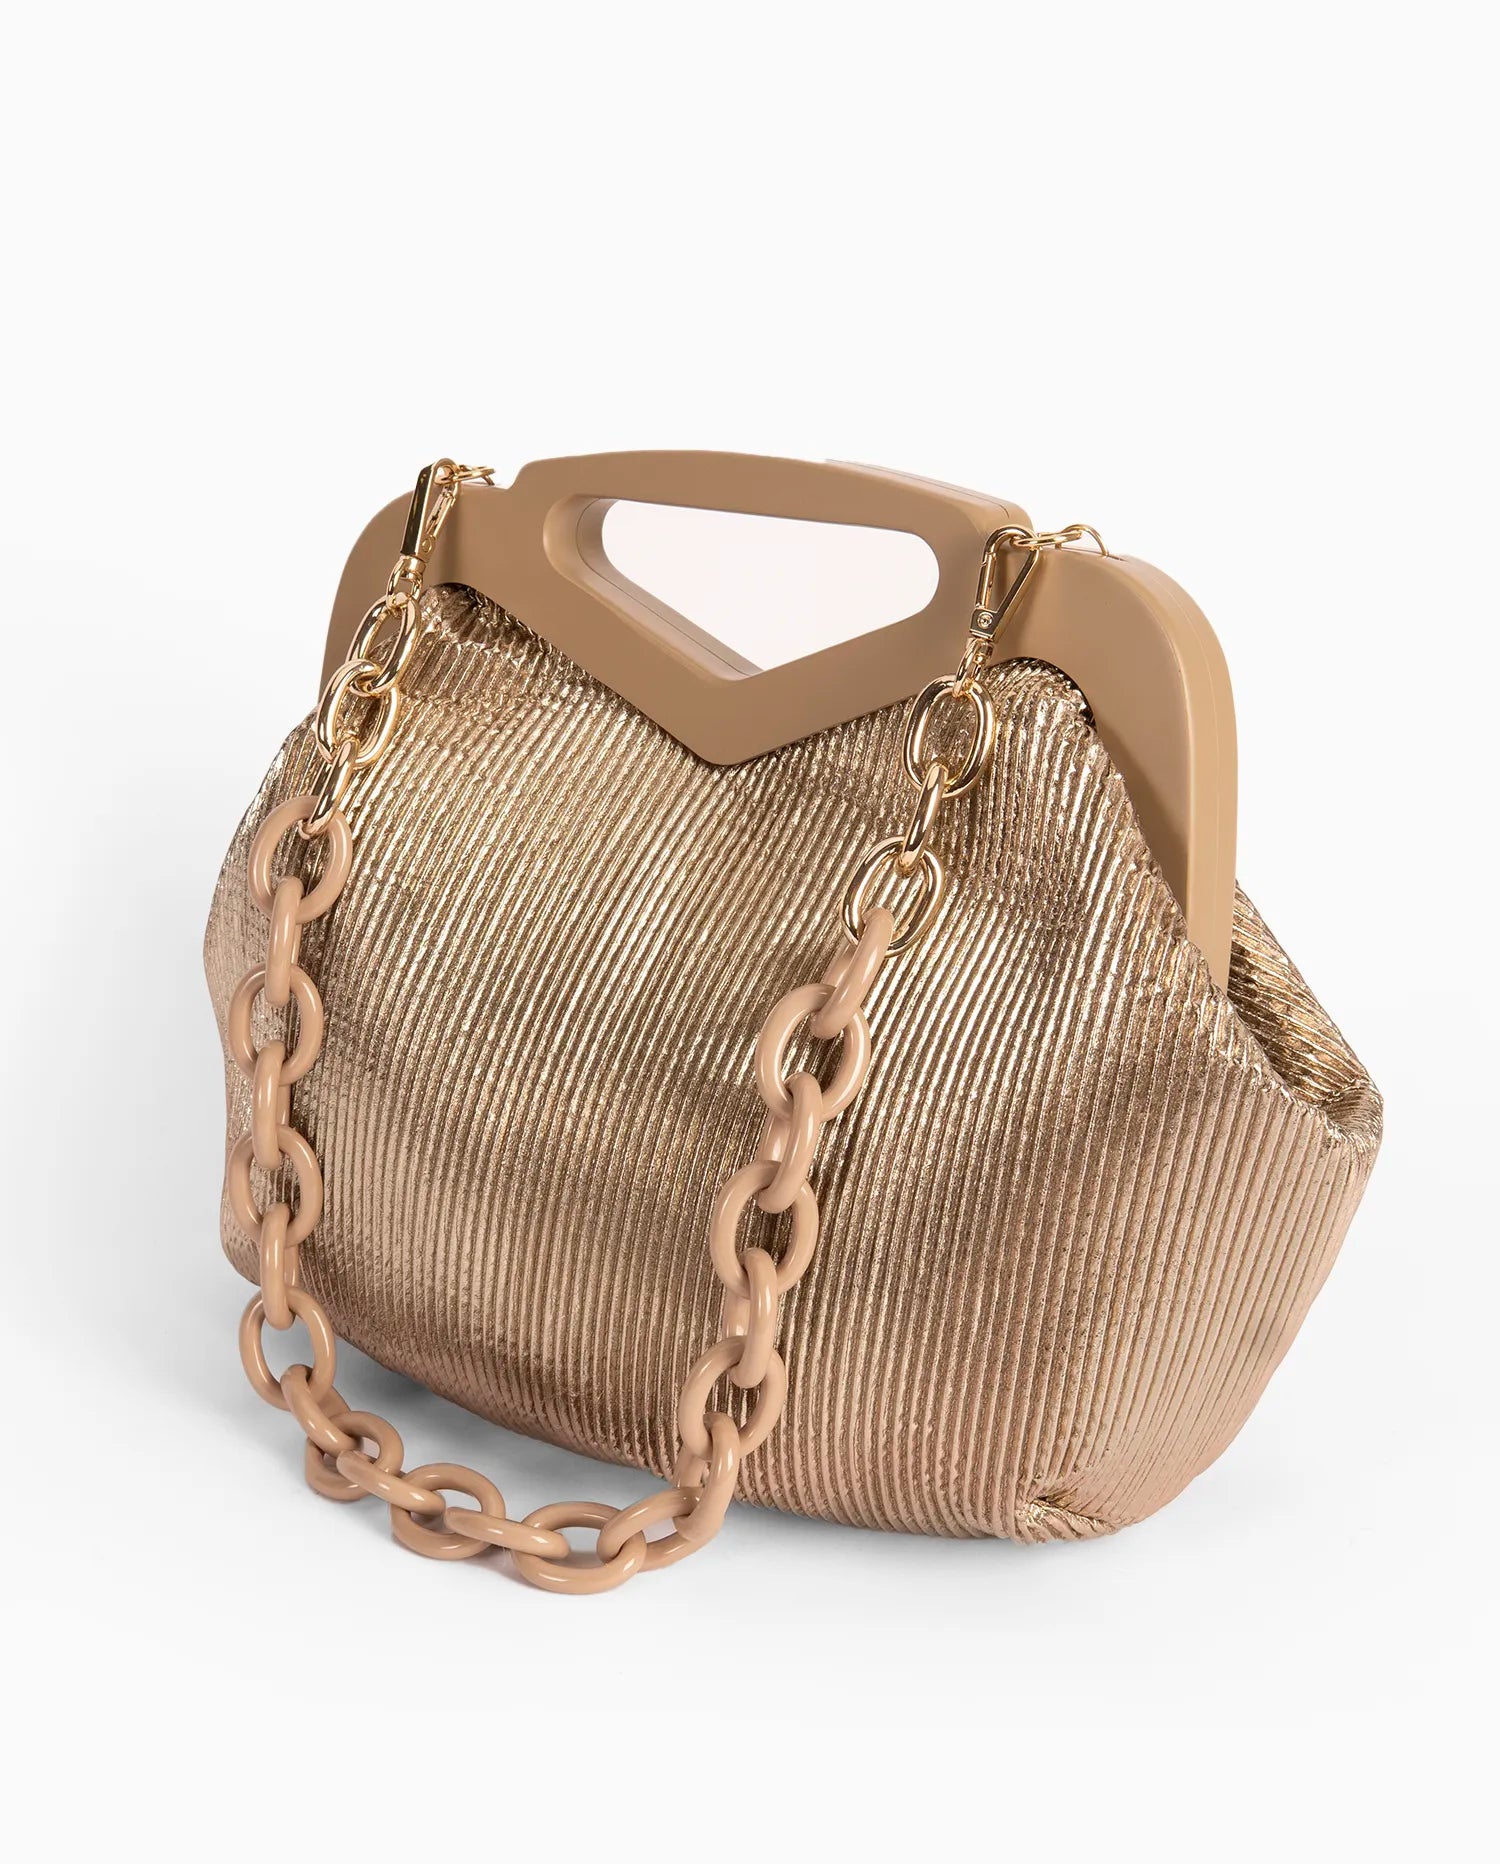  View of Pepe Moll Sequin Handbag 241470's magnetic closure, ensuring secure yet accessible storage.